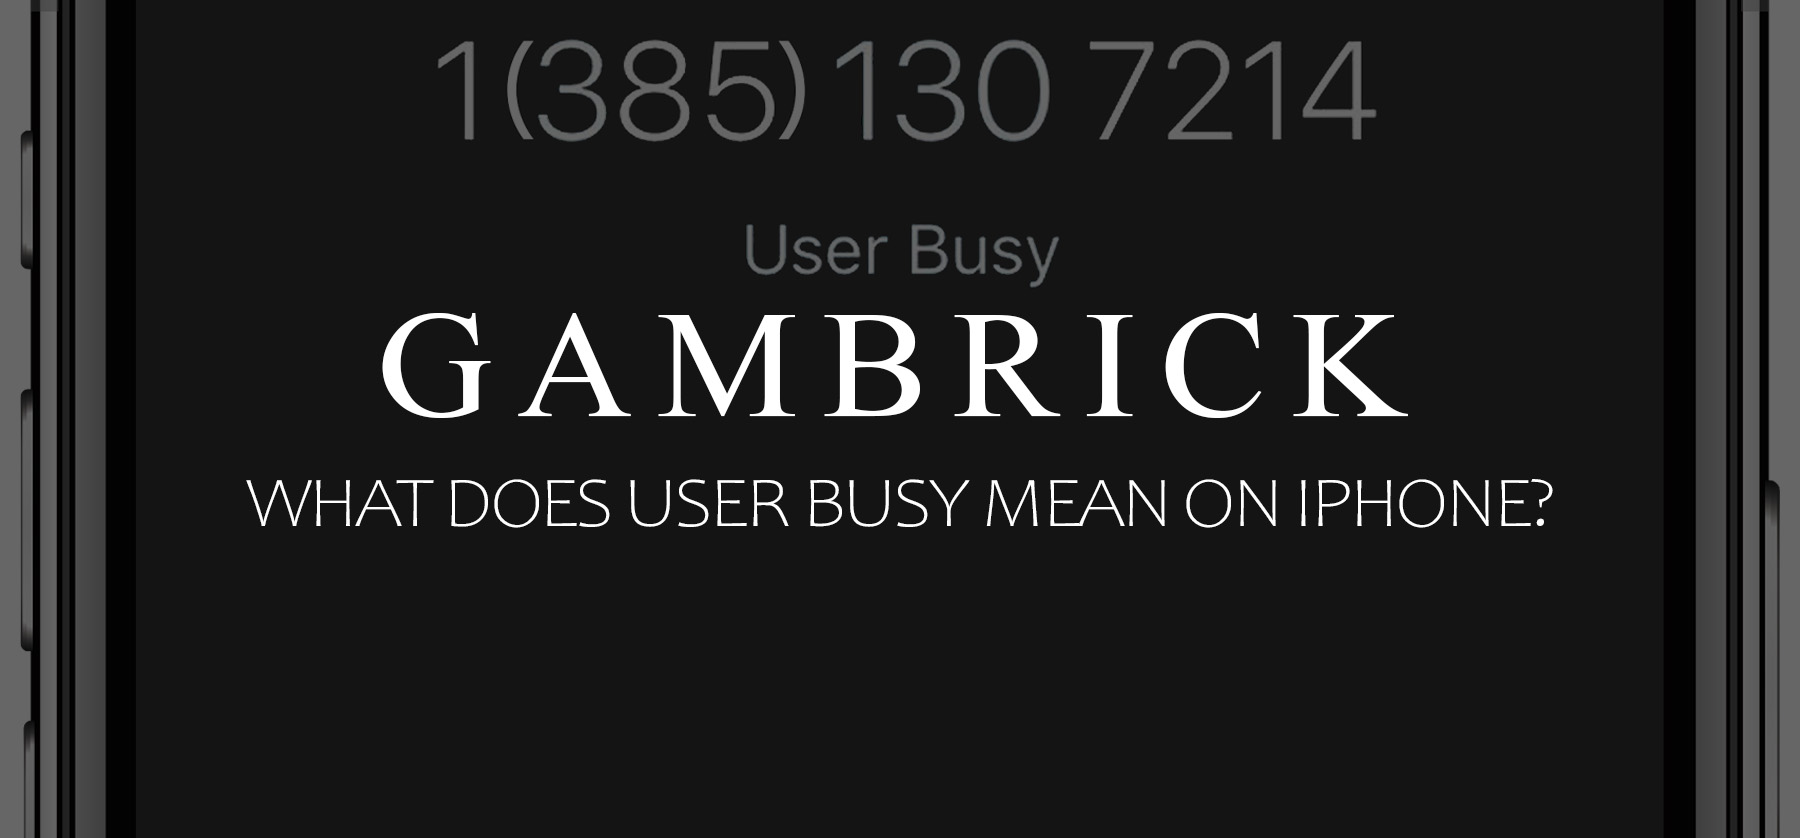 what does user busy mean on iphone banner 1.0